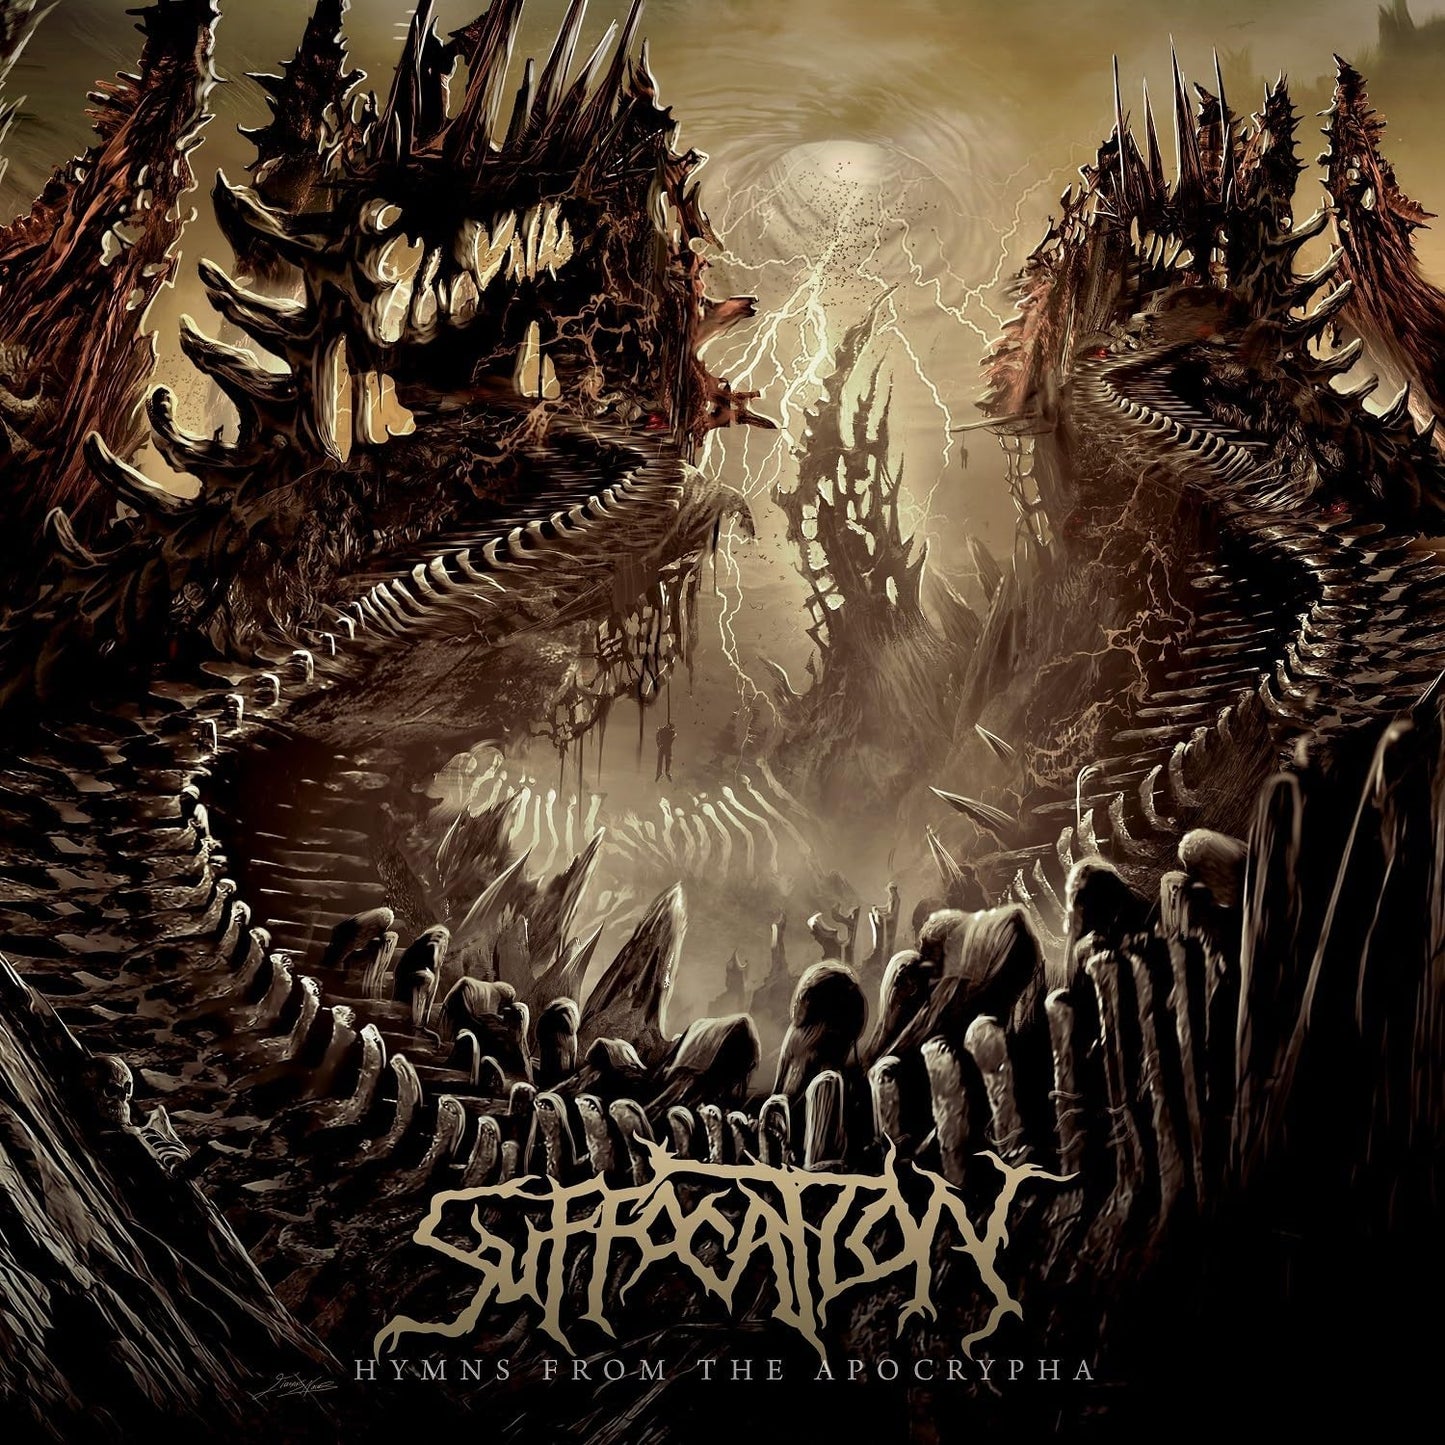 CD - Suffocation - Hymns From the Apocrypha